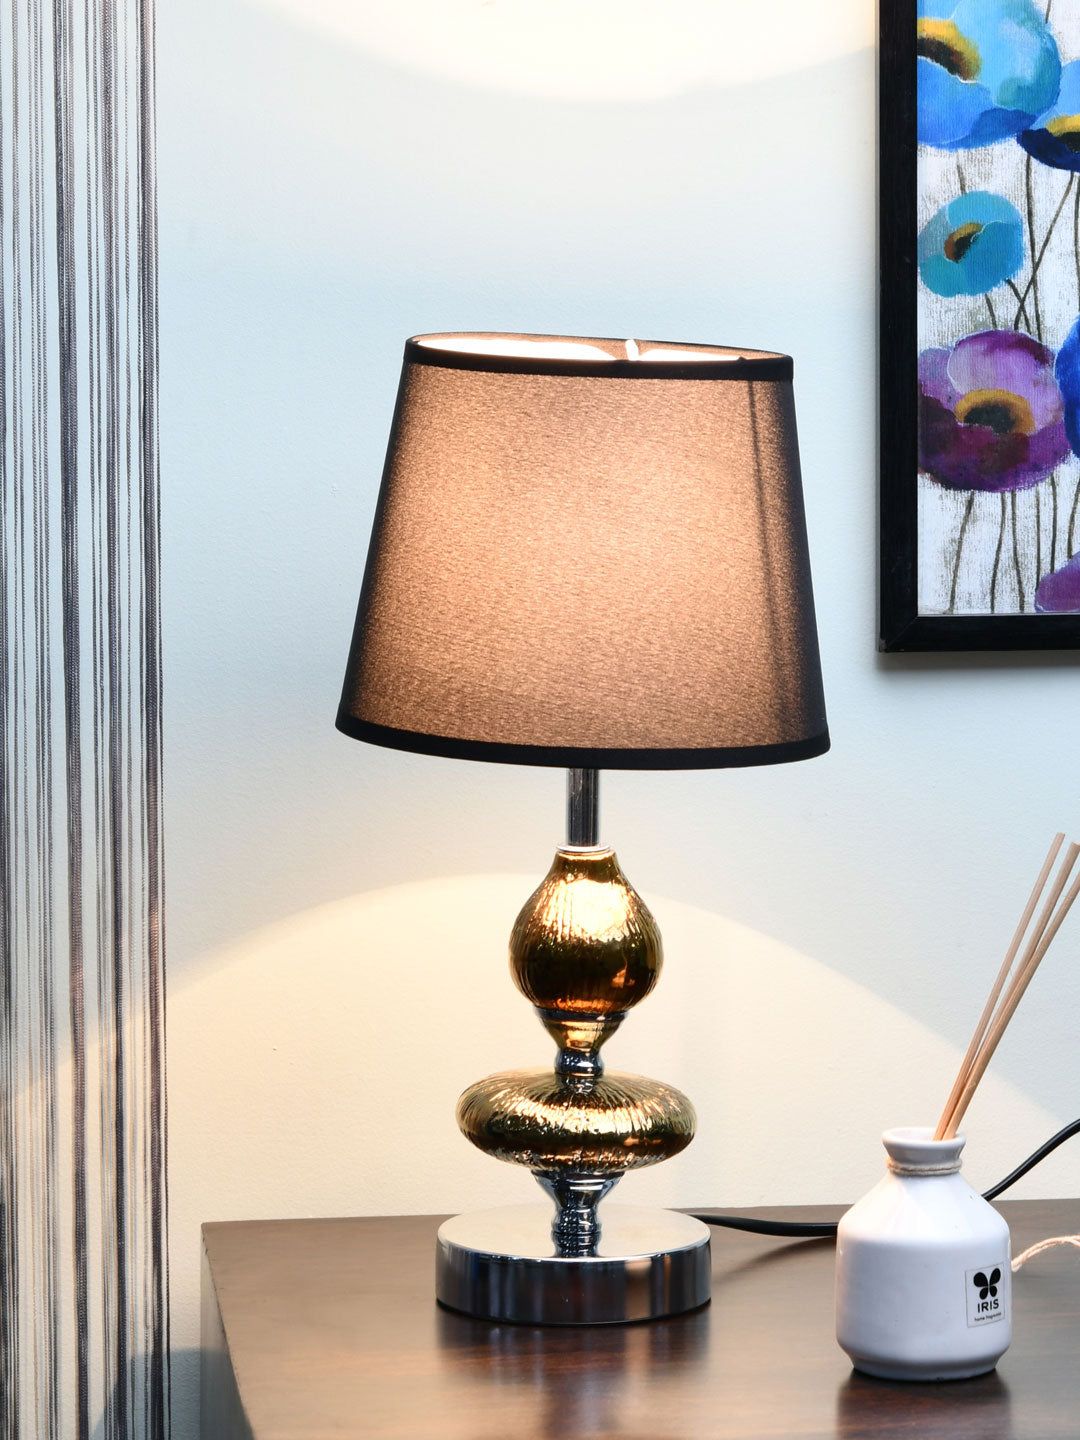 Athome by Nilkamal Black & Gold Toned Ceramic Table Lamp Price in India